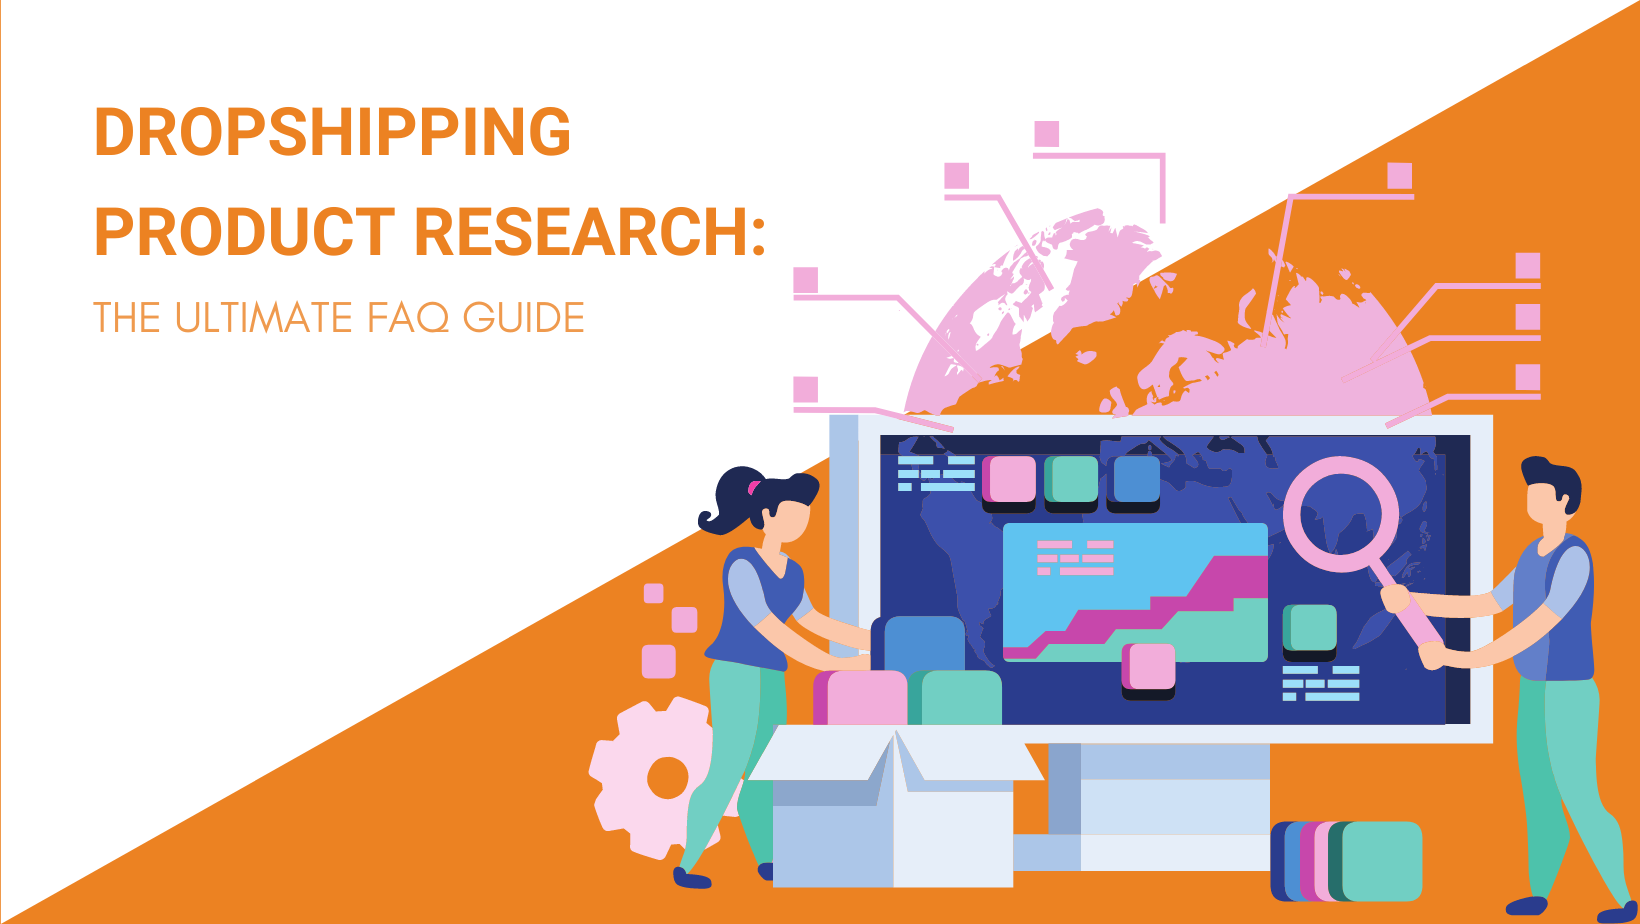 DROPSHIPPING PRODUCT RESEARCH